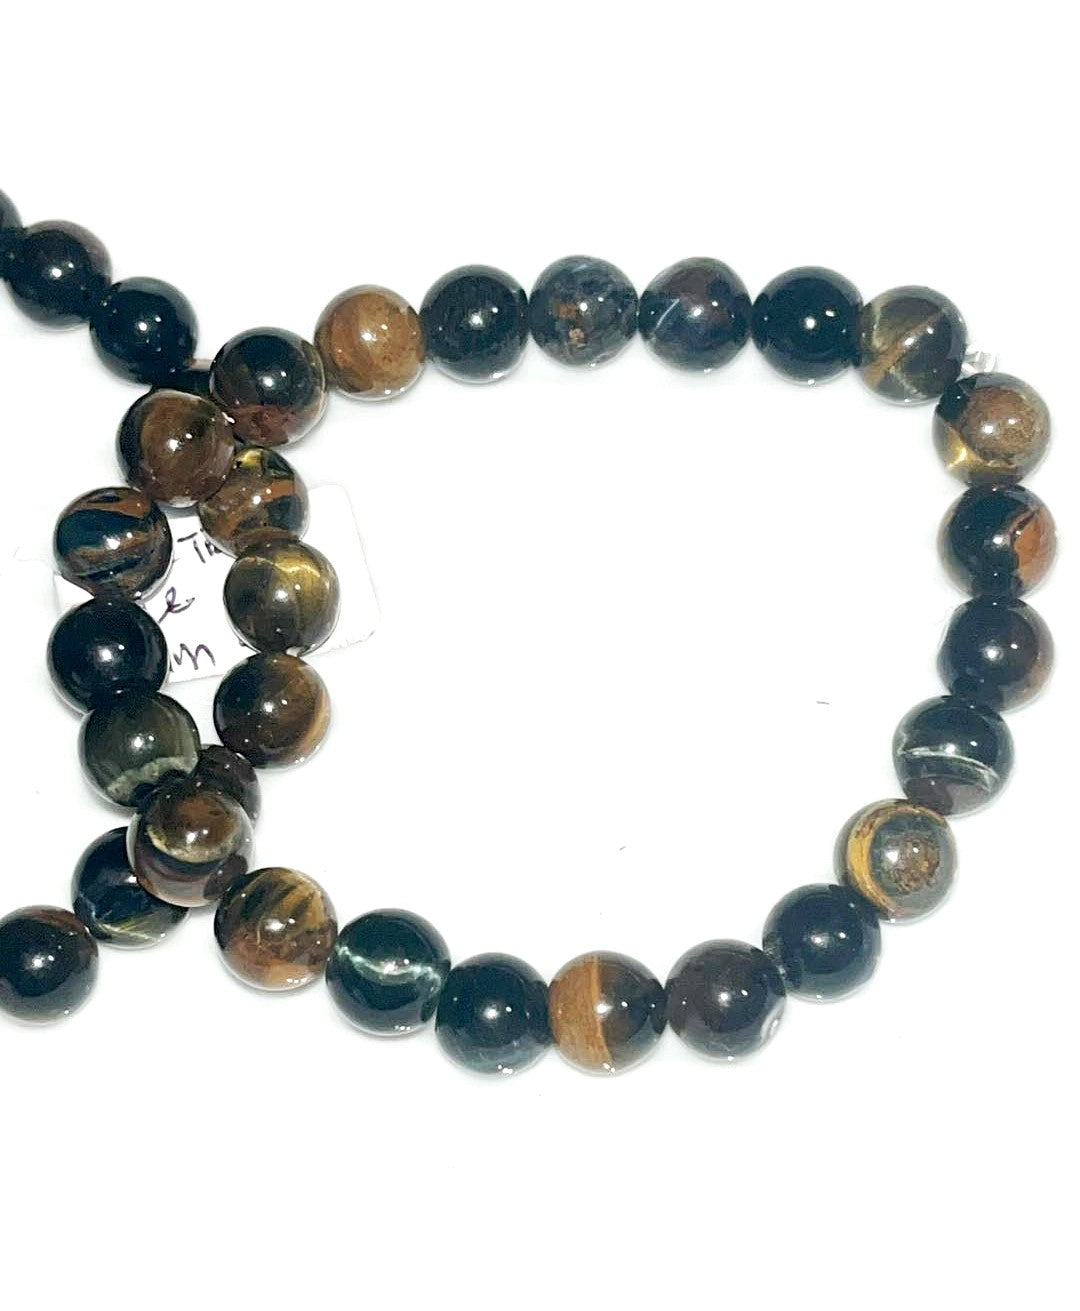 Blue Tiger's Eye 8 mm bracelet-strength, Courage, willpower, overcome challenges, confidence, grounding, motivation, remove negative energy